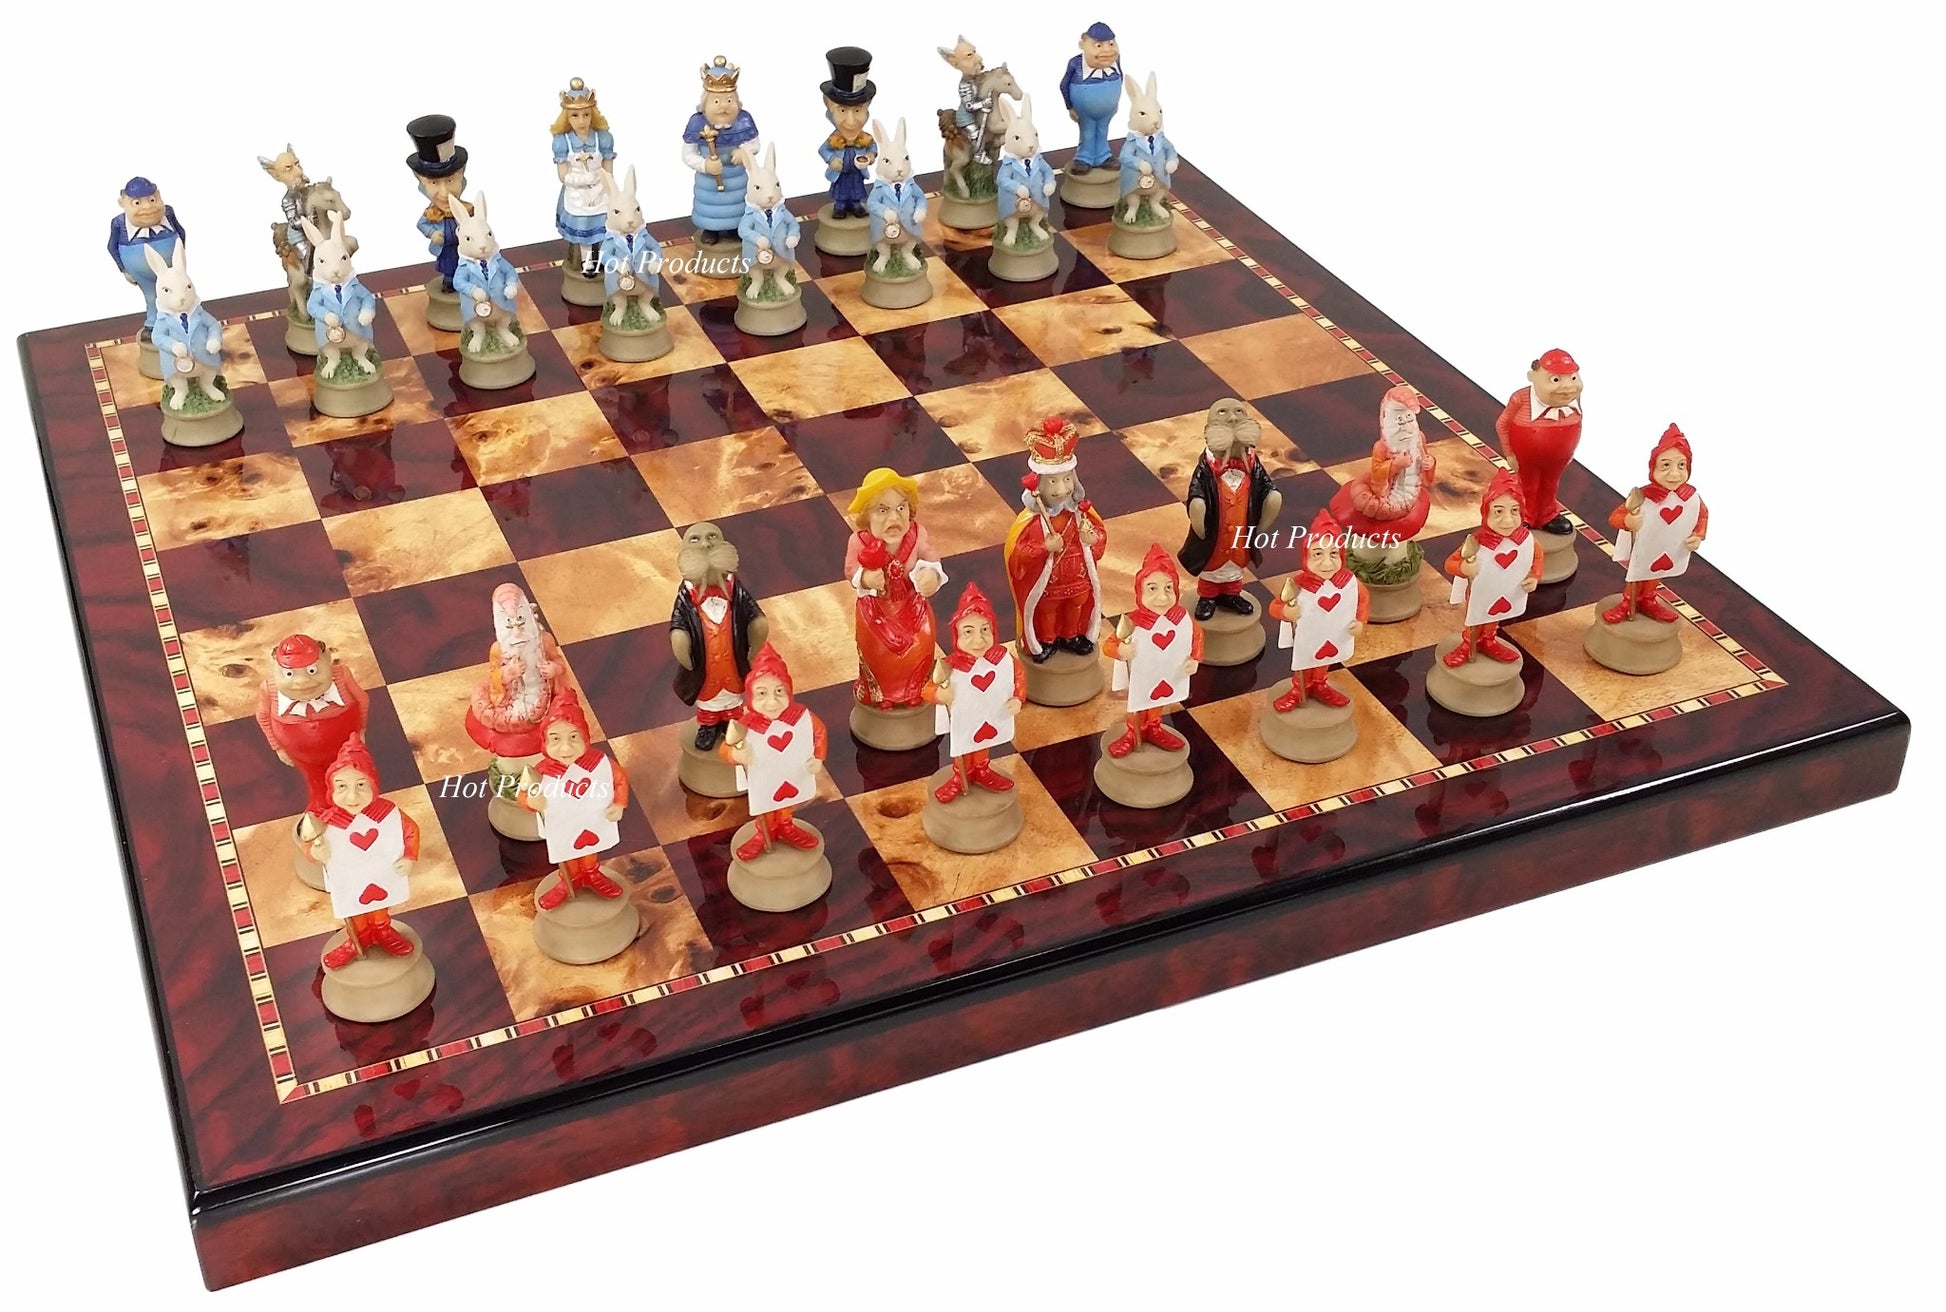 Steampunk Fantasy Chess Set Hand Painted Board Game 